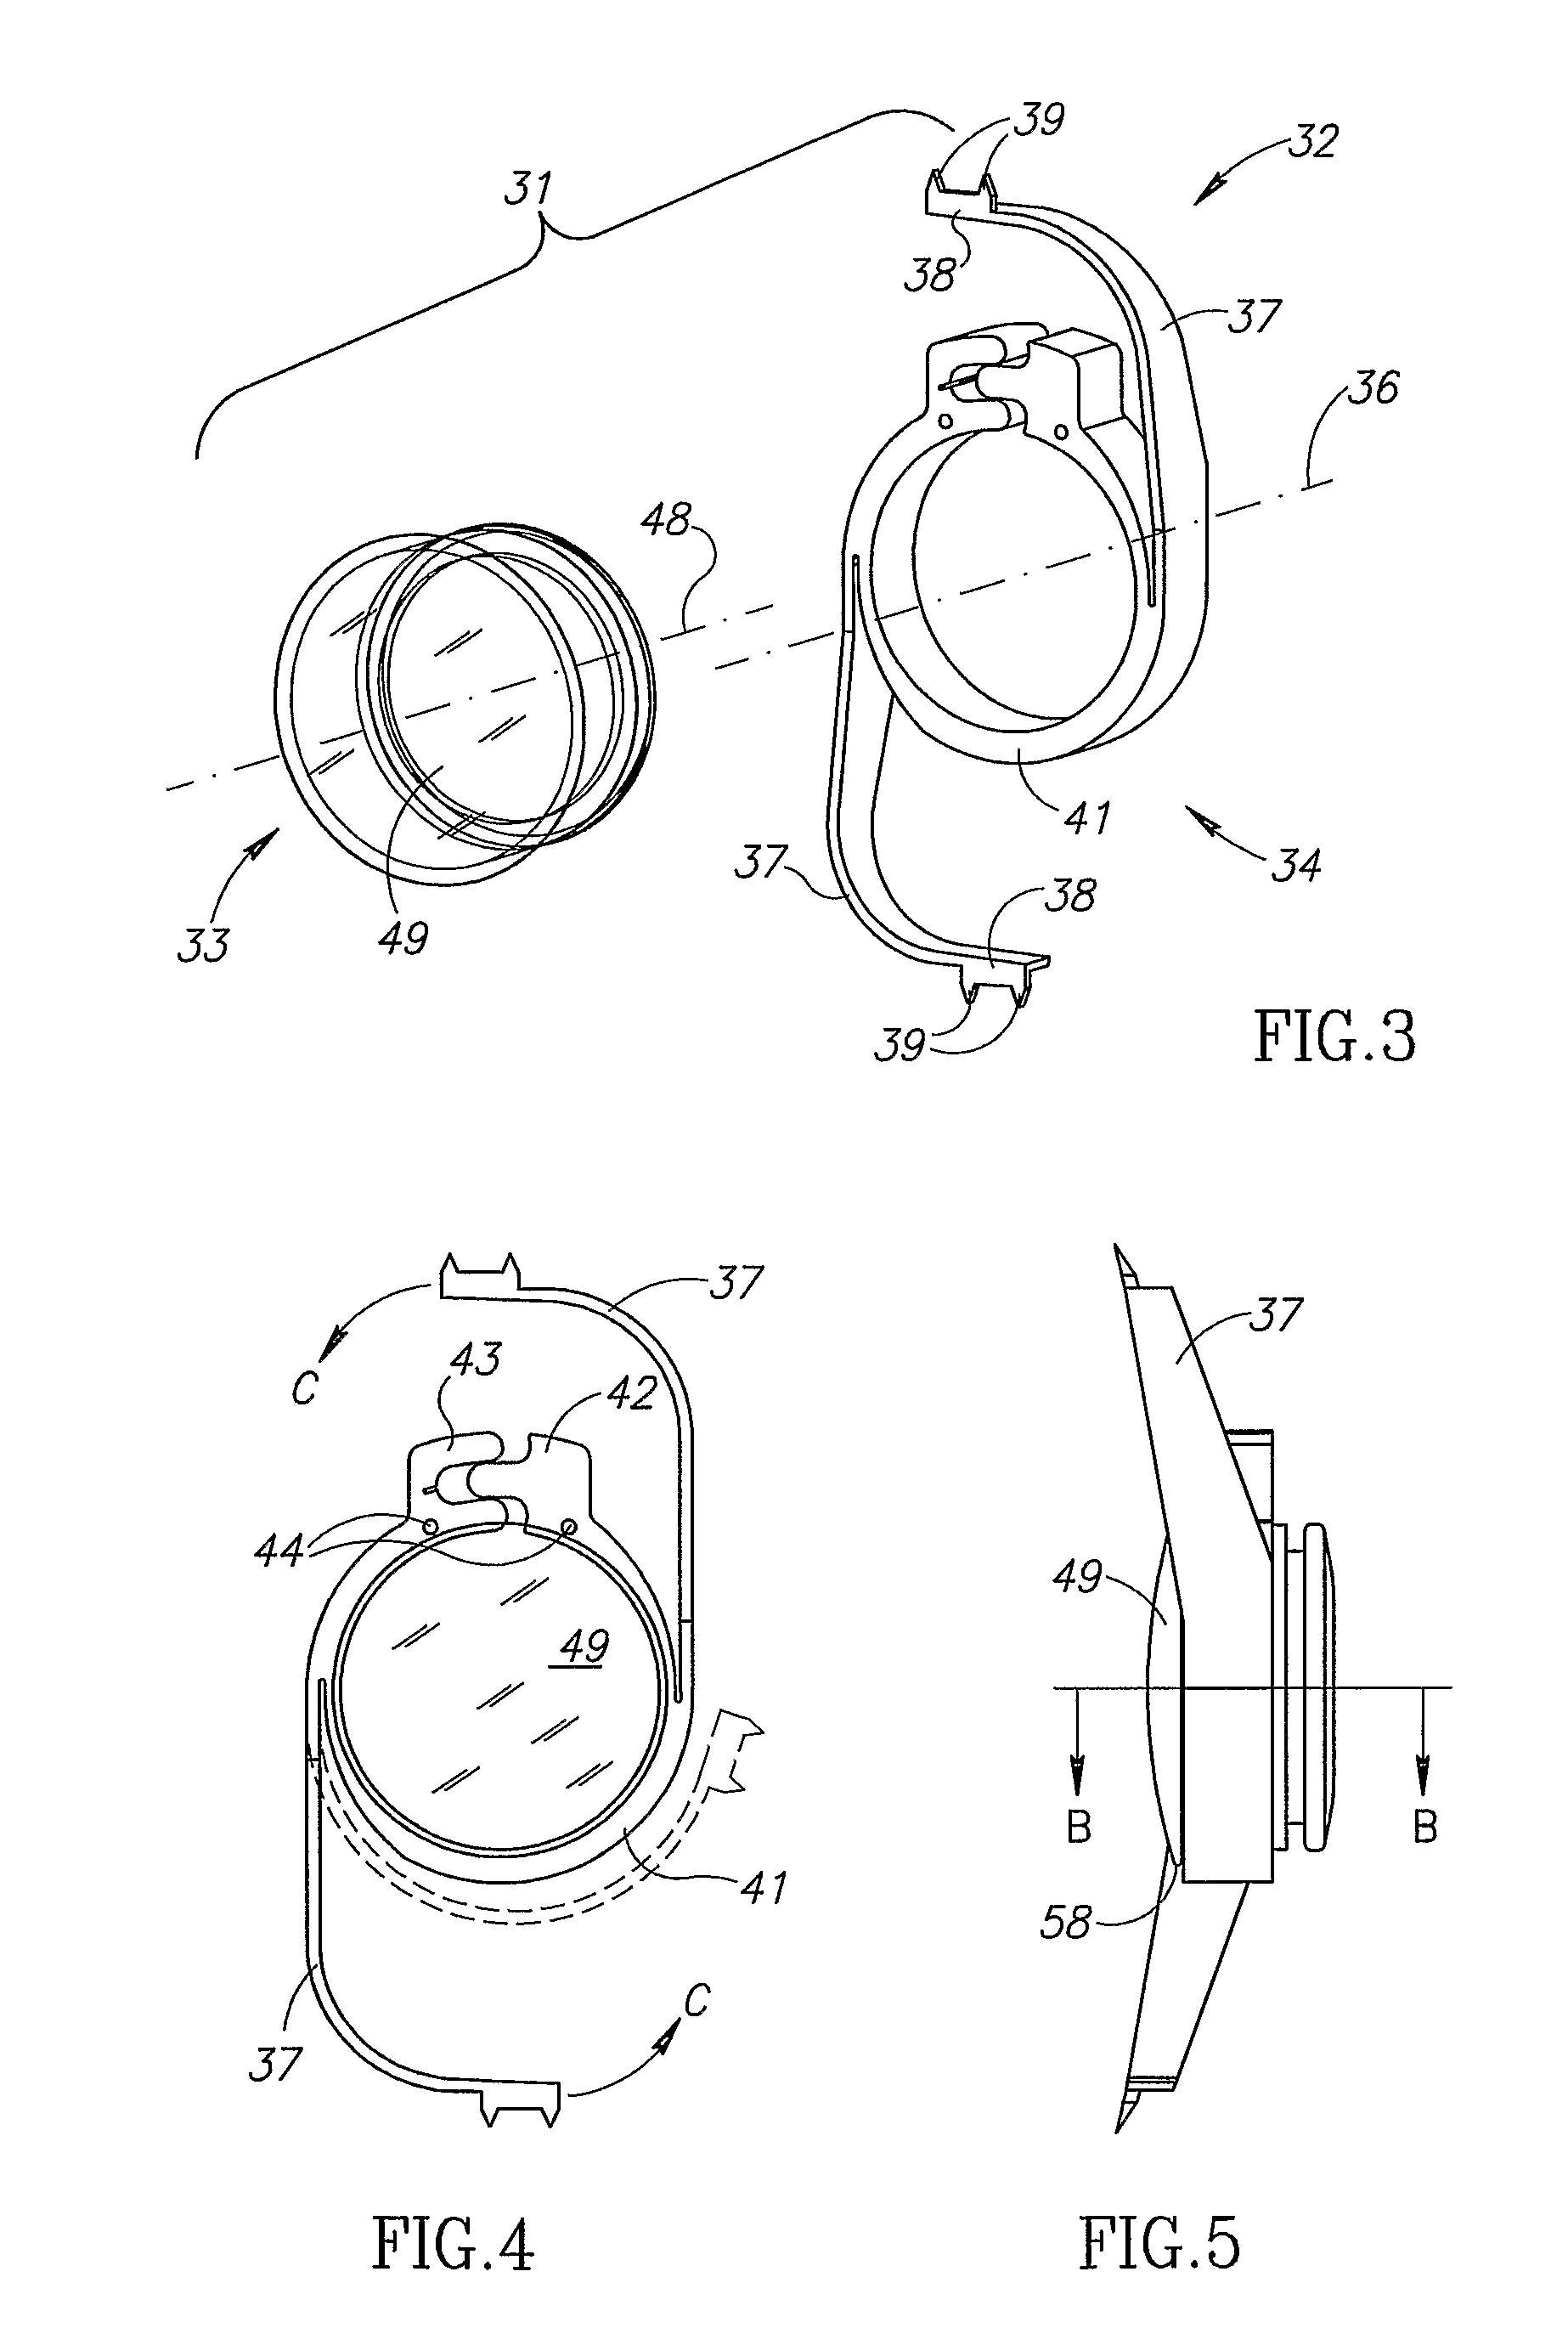 Accommodating intraocular lens assemblies and accommodation measurement implant